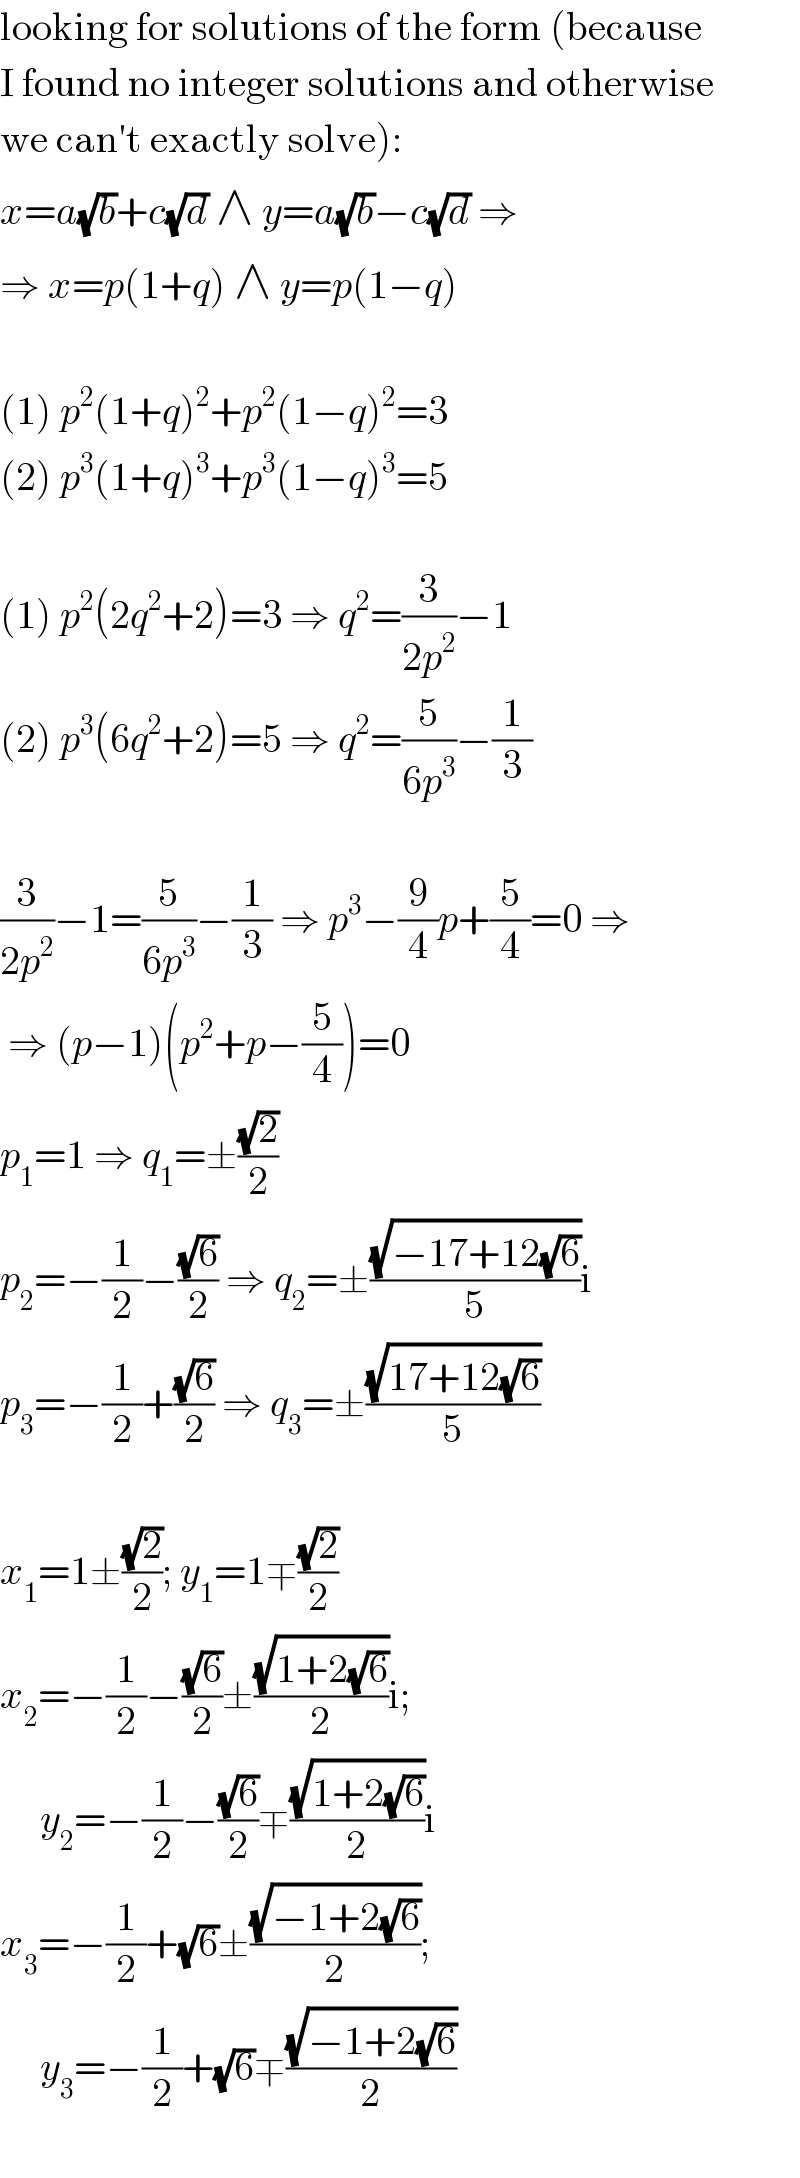 looking for solutions of the form (because  I found no integer solutions and otherwise  we can′t exactly solve):  x=a(√b)+c(√d) ∧ y=a(√b)−c(√d) ⇒  ⇒ x=p(1+q) ∧ y=p(1−q)    (1) p^2 (1+q)^2 +p^2 (1−q)^2 =3  (2) p^3 (1+q)^3 +p^3 (1−q)^3 =5    (1) p^2 (2q^2 +2)=3 ⇒ q^2 =(3/(2p^2 ))−1  (2) p^3 (6q^2 +2)=5 ⇒ q^2 =(5/(6p^3 ))−(1/3)    (3/(2p^2 ))−1=(5/(6p^3 ))−(1/3) ⇒ p^3 −(9/4)p+(5/4)=0 ⇒   ⇒ (p−1)(p^2 +p−(5/4))=0  p_1 =1 ⇒ q_1 =±((√2)/2)  p_2 =−(1/2)−((√6)/2) ⇒ q_2 =±((√(−17+12(√6)))/5)i  p_3 =−(1/2)+((√6)/2) ⇒ q_3 =±((√(17+12(√6)))/5)    x_1 =1±((√2)/2); y_1 =1∓((√2)/2)  x_2 =−(1/2)−((√6)/2)±((√(1+2(√6)))/2)i;       y_2 =−(1/2)−((√6)/2)∓((√(1+2(√6)))/2)i  x_3 =−(1/2)+(√6)±((√(−1+2(√6)))/2);       y_3 =−(1/2)+(√6)∓((√(−1+2(√6)))/2)    